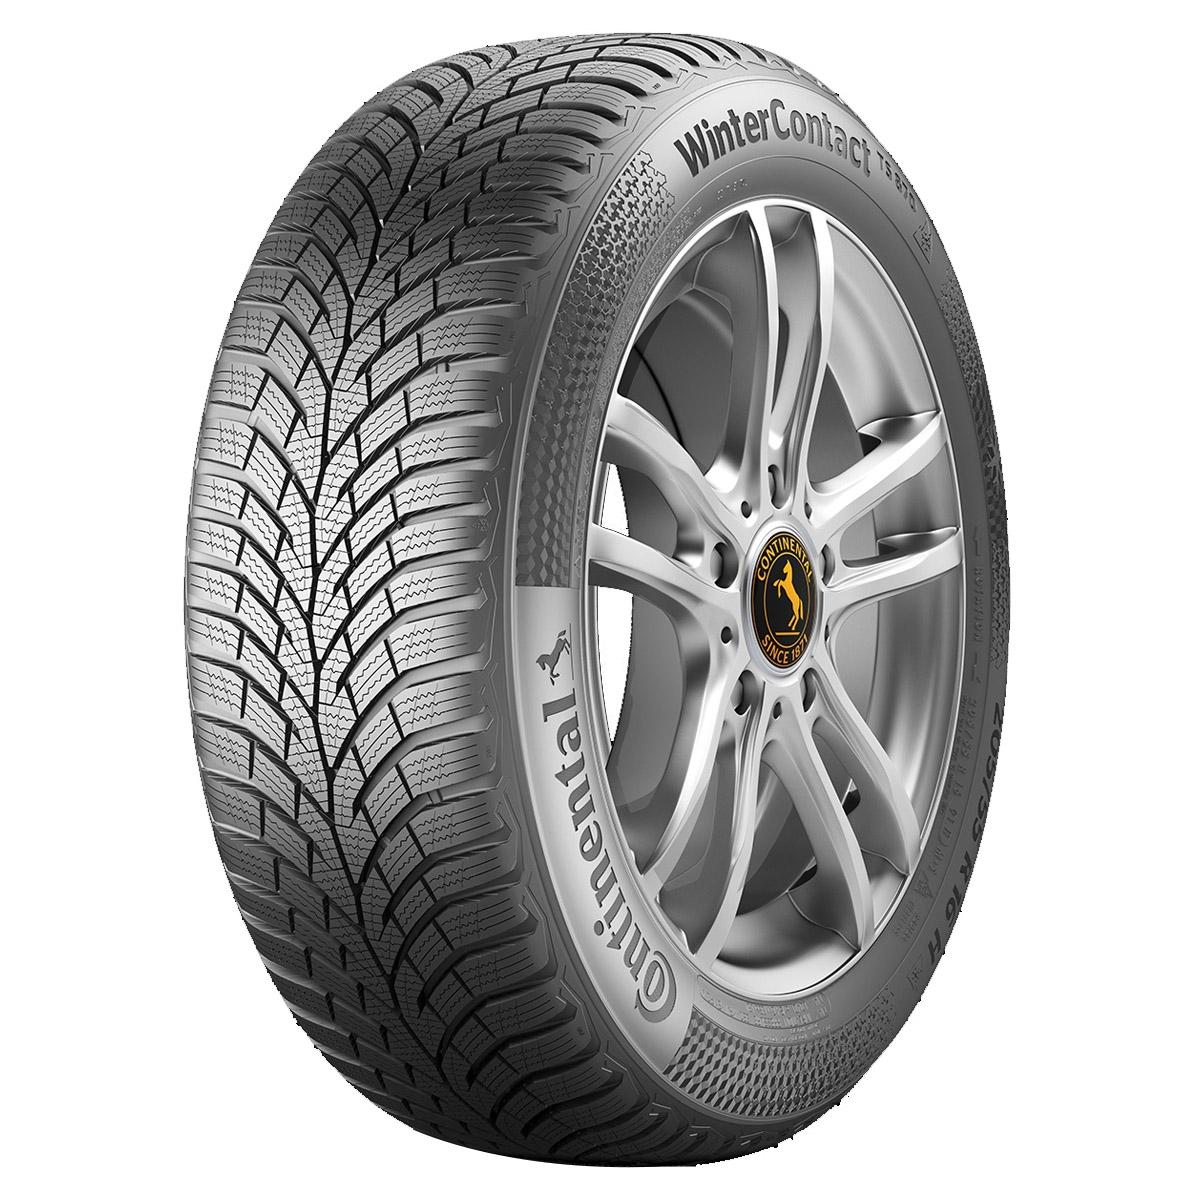 Anvelope iarna CONTINENTAL WINTER CONTACT TS870 185/60 R15 88T